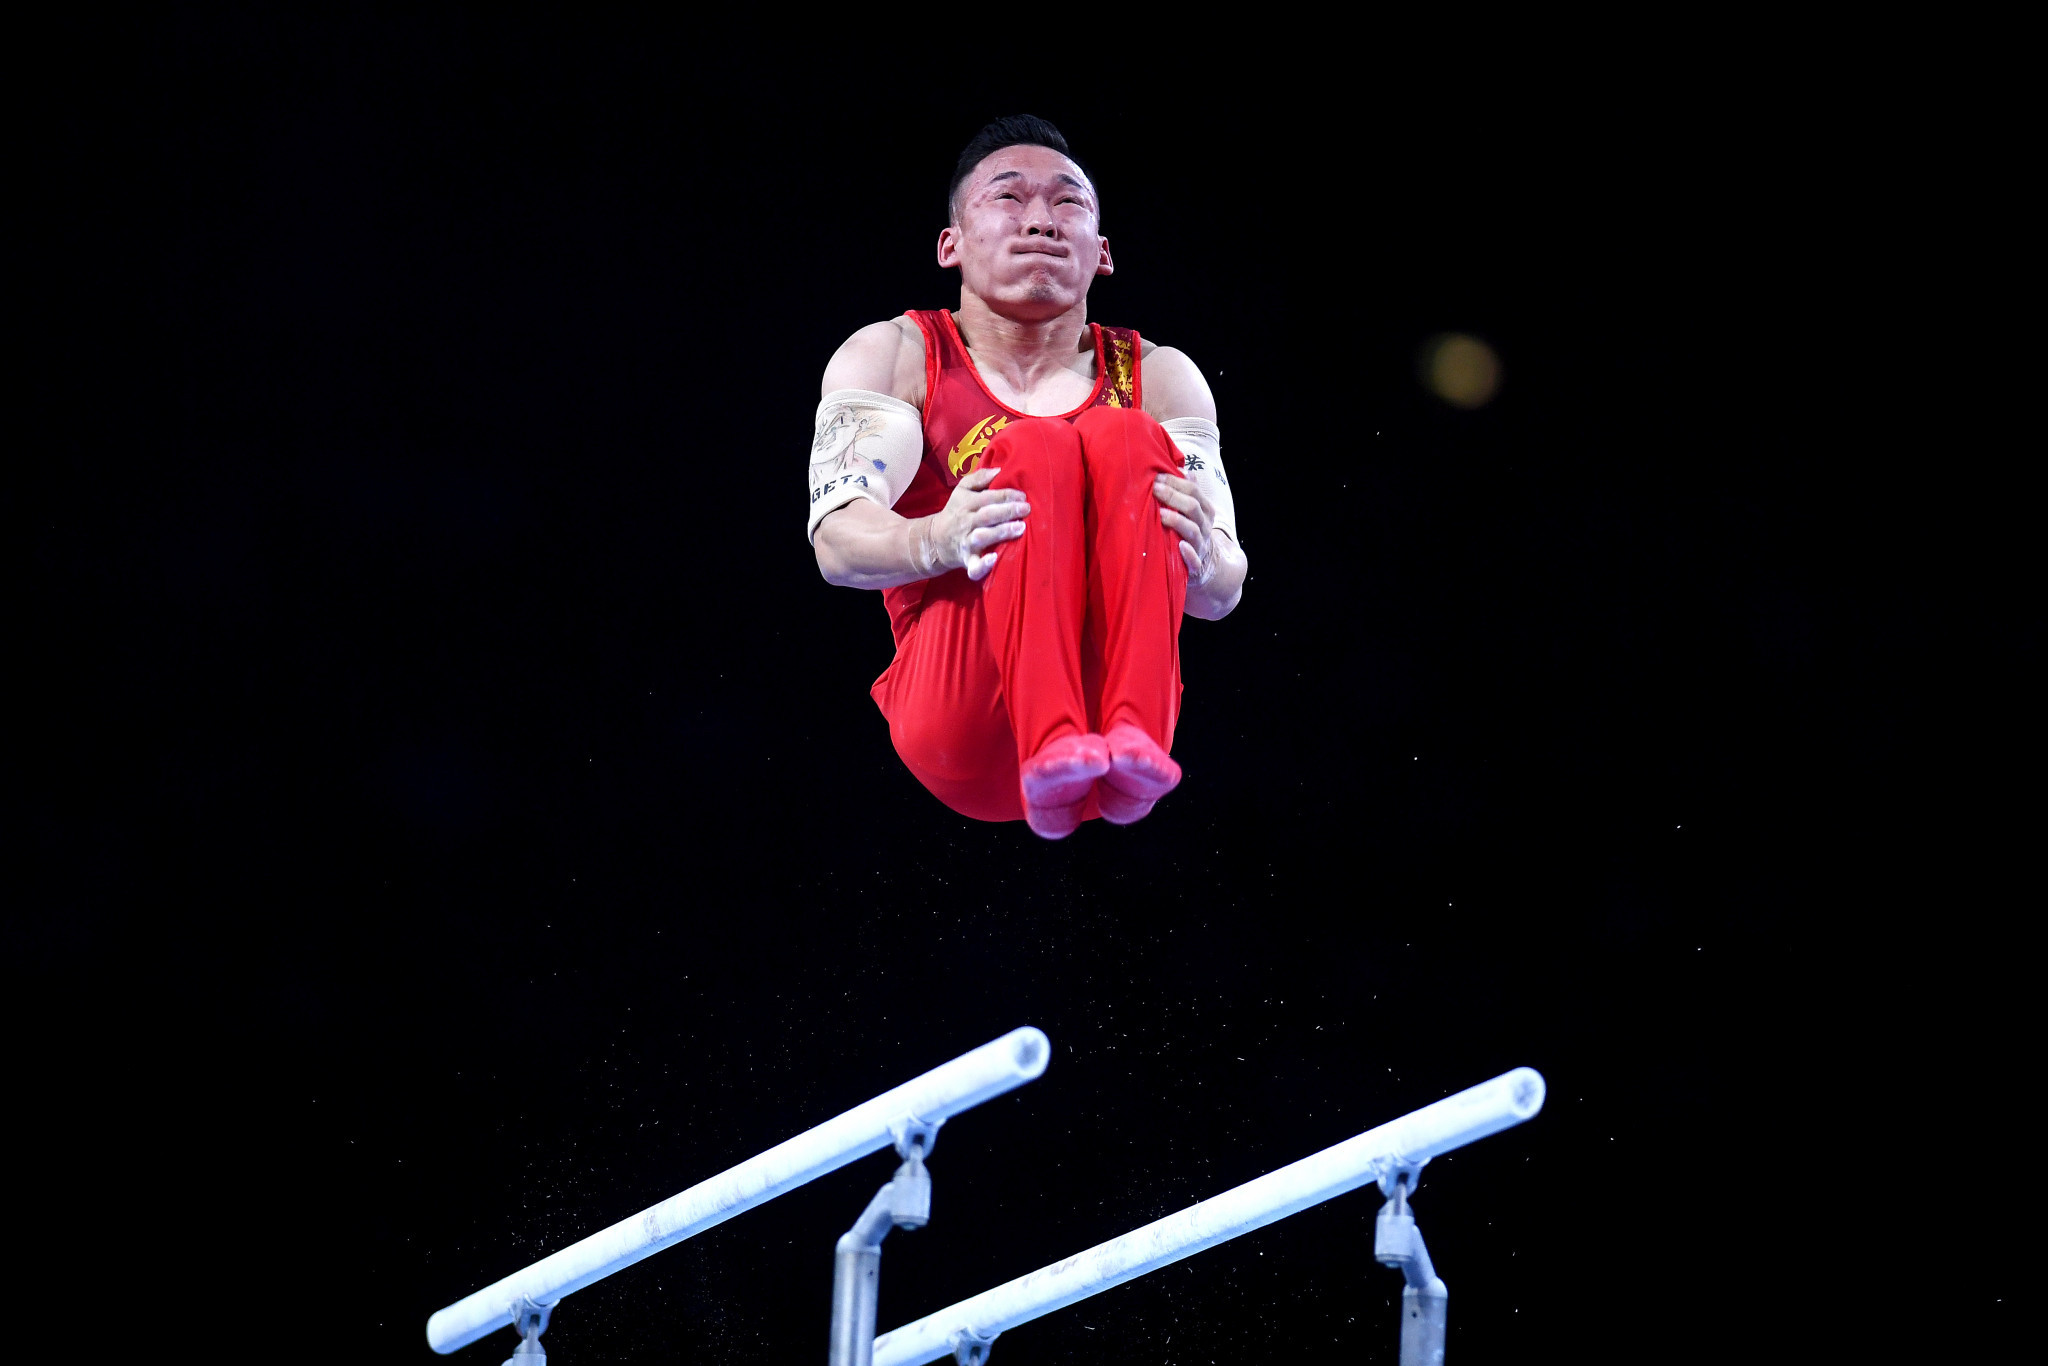 China had named a 12-strong team for the apparatus event in Melbourne ©Getty Images